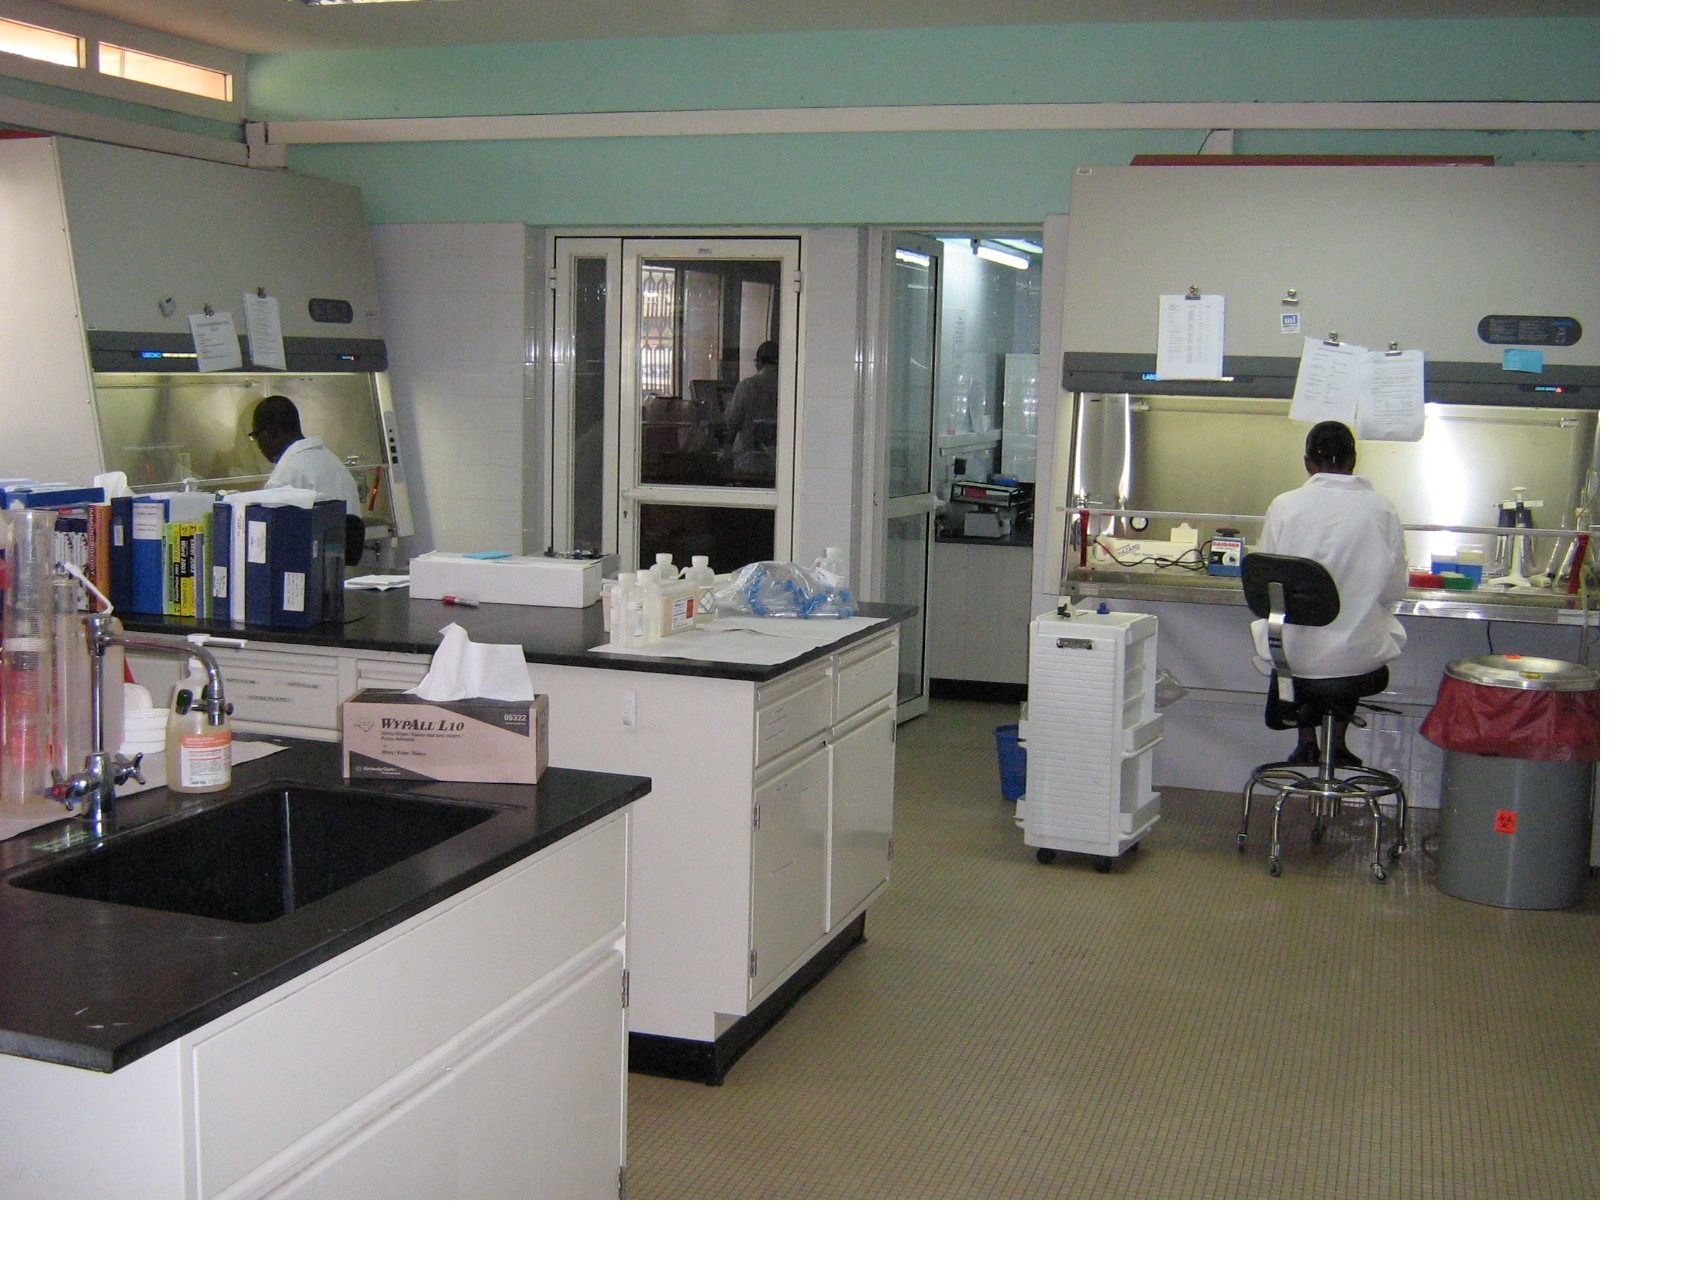 Lab interior with space